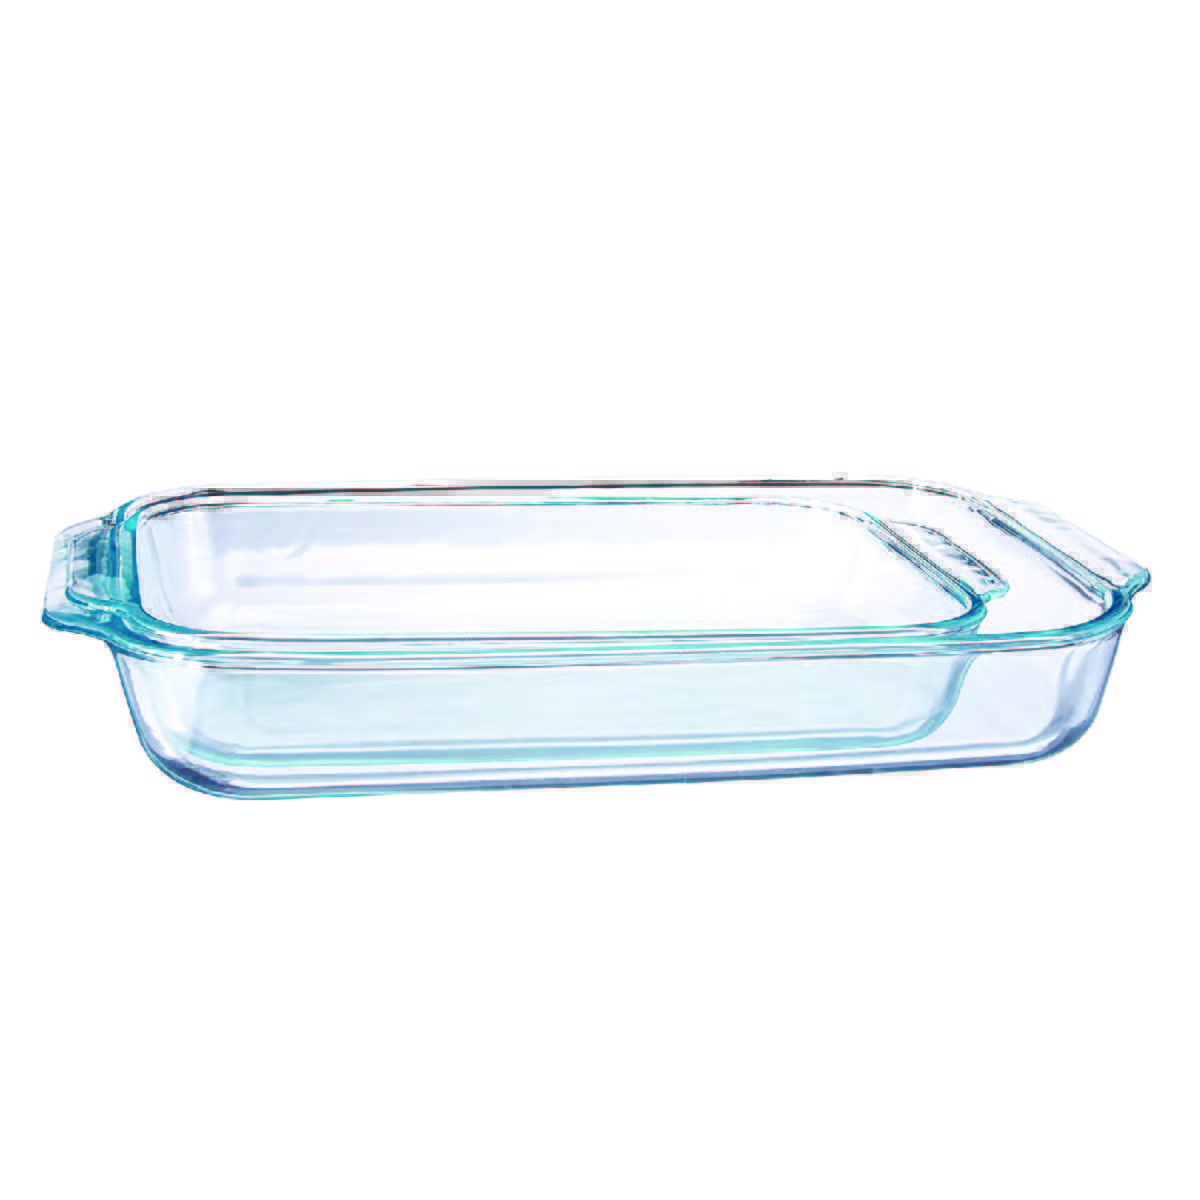 Two different-sized rectangular clear glass baking dishes with the smaller one inside the larger one. 